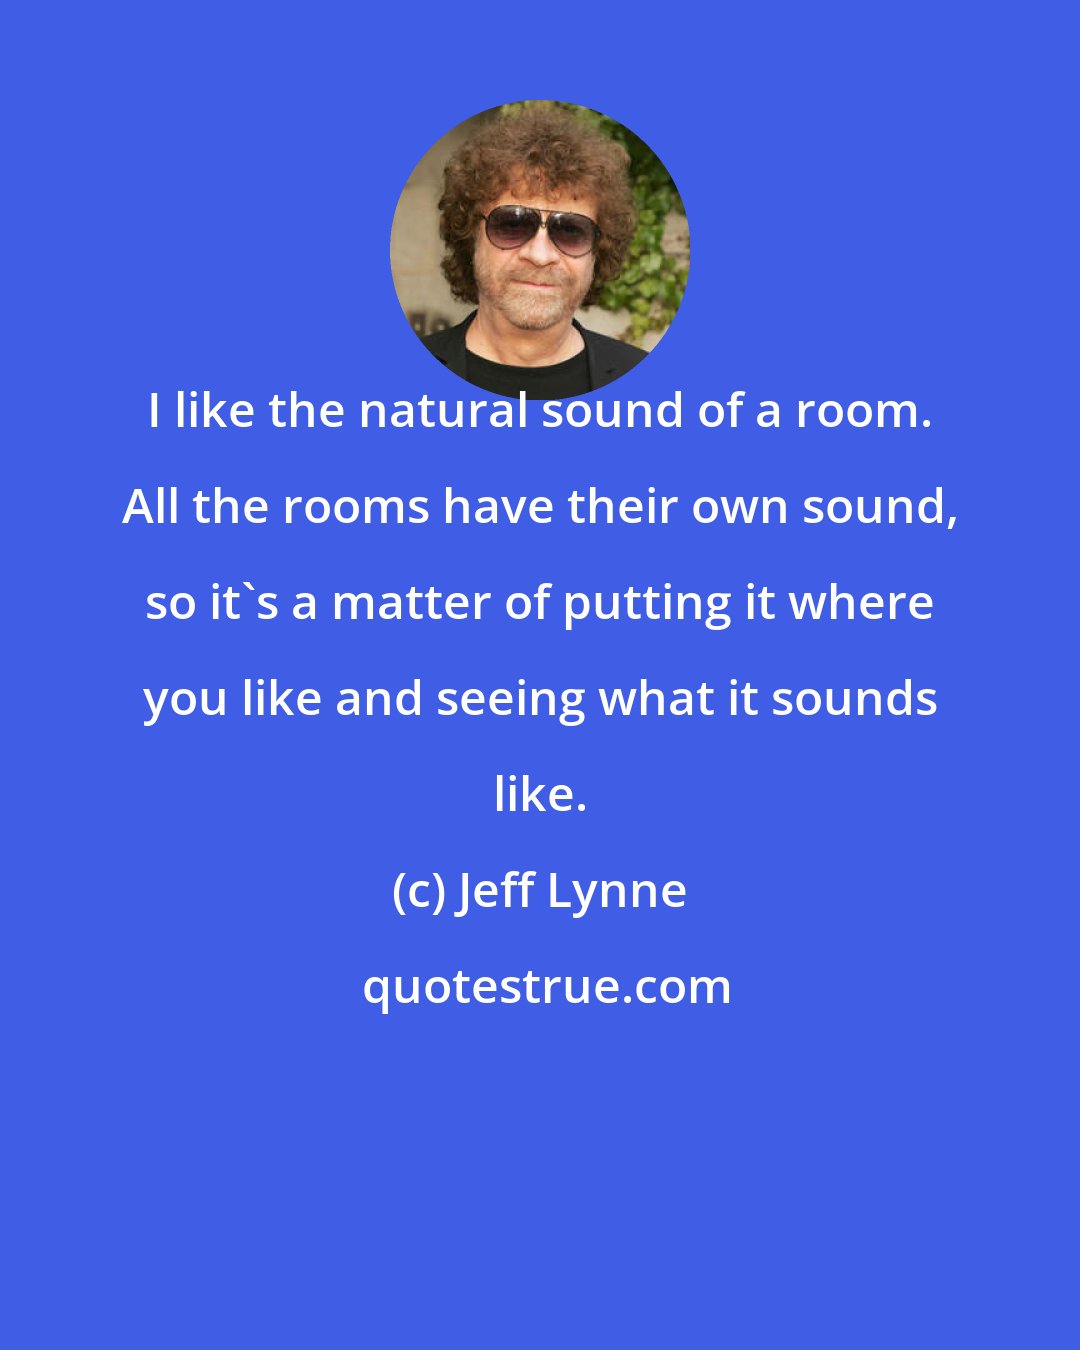 Jeff Lynne: I like the natural sound of a room. All the rooms have their own sound, so it's a matter of putting it where you like and seeing what it sounds like.